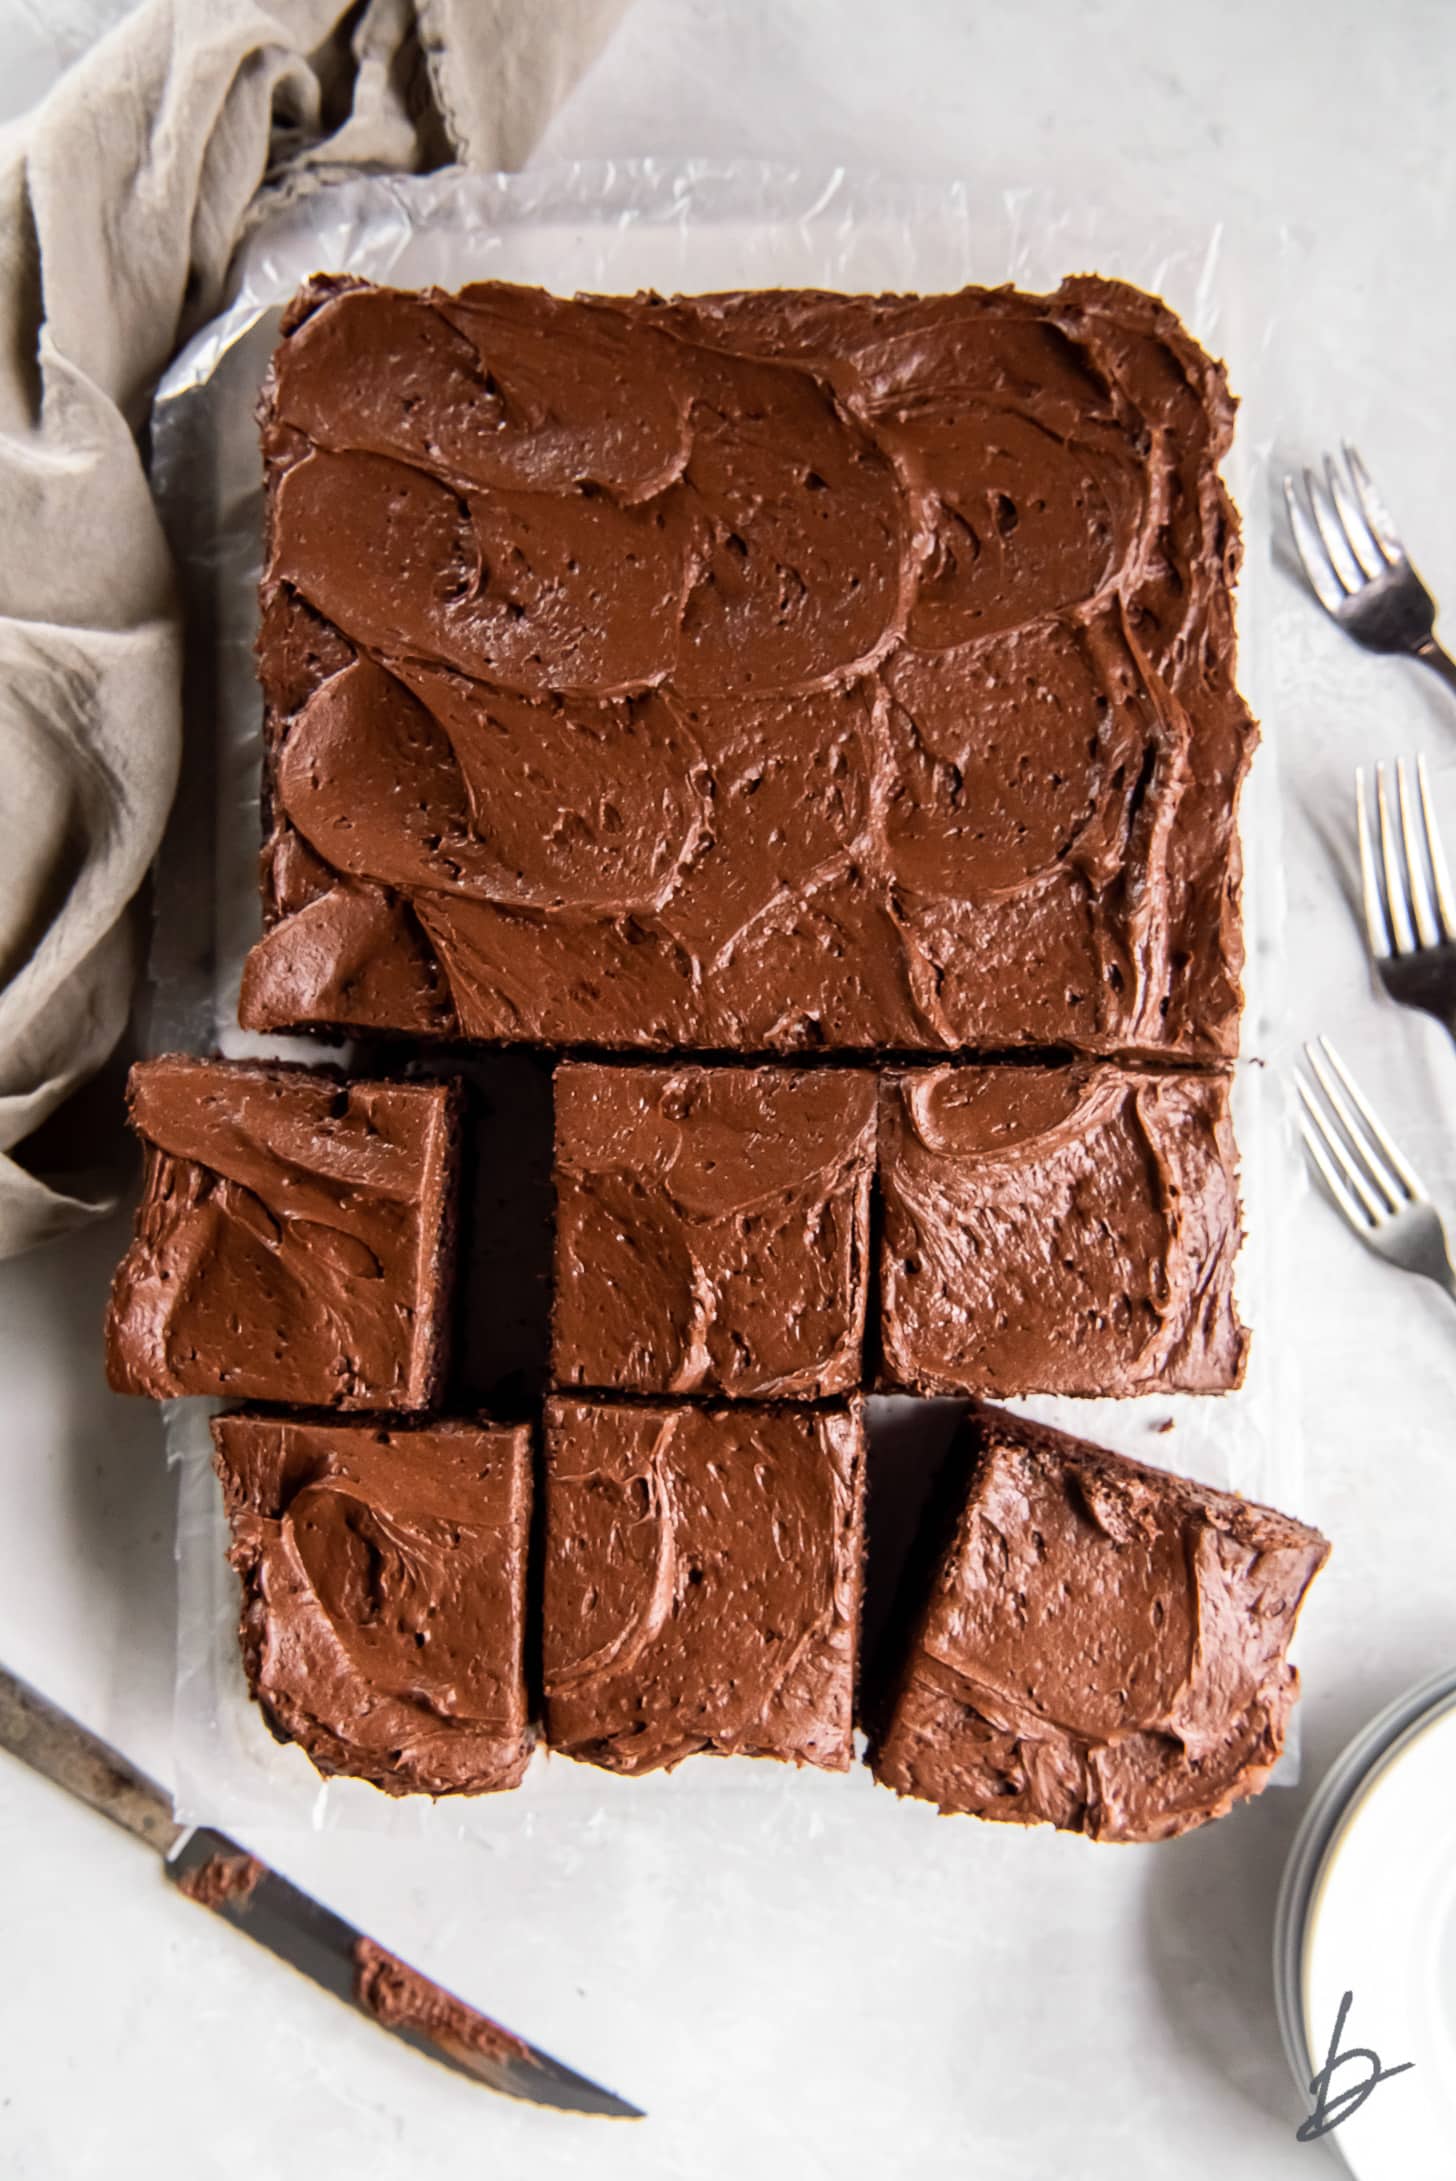 chocolate zucchini sheet cake with chocolate frosting and half the cake cut into squares